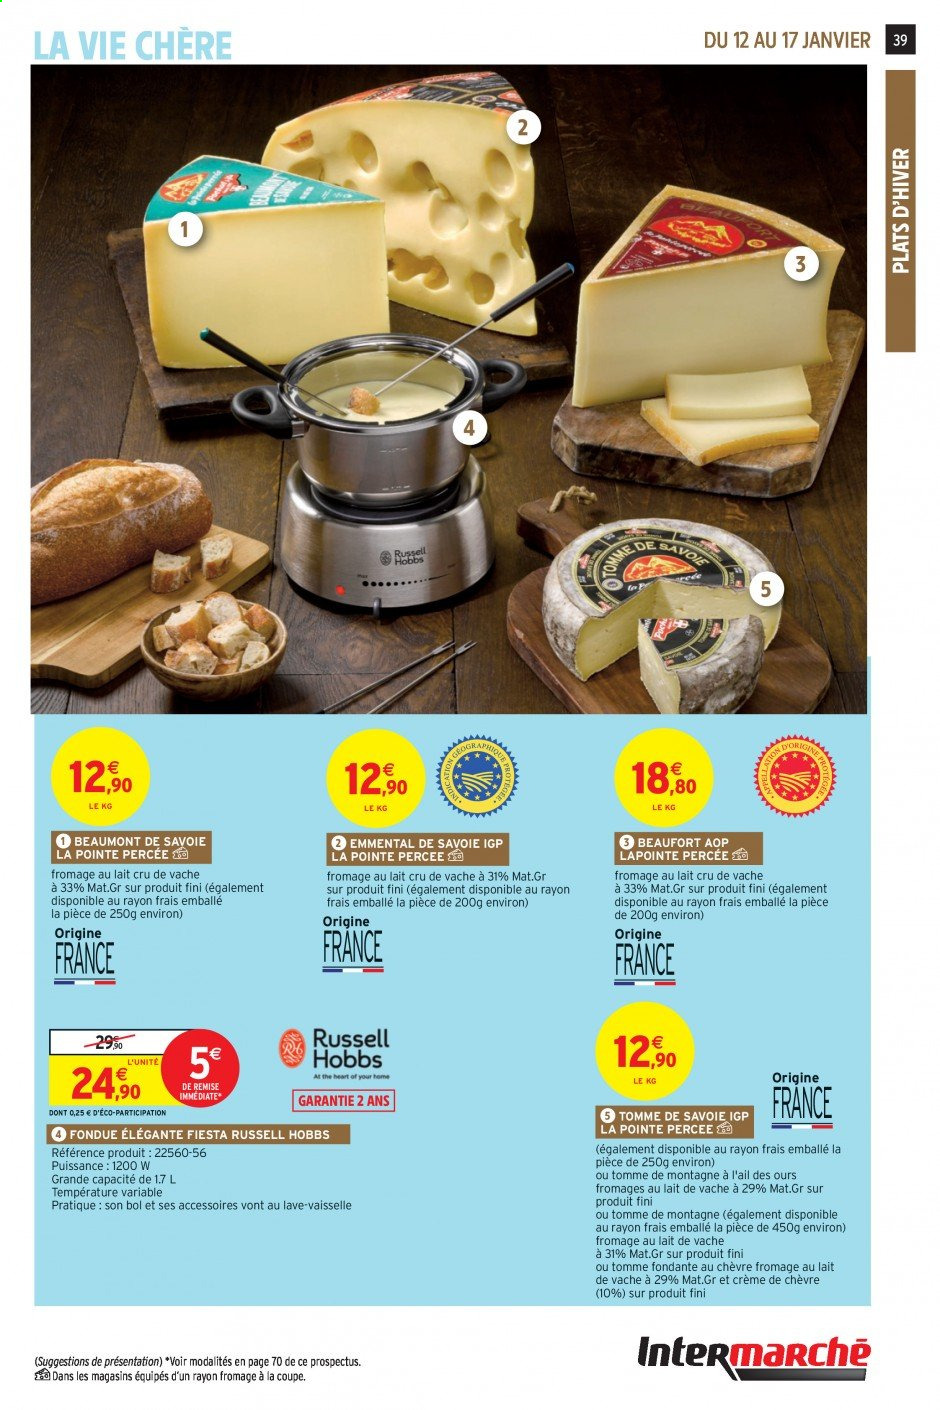 thumbnail - Catalogue Intermarché Super - 12/01/2021 - 17/01/2021 - Produits soldés - emmental, Beaufort, fromage, Russell Hobbs. Page 39.